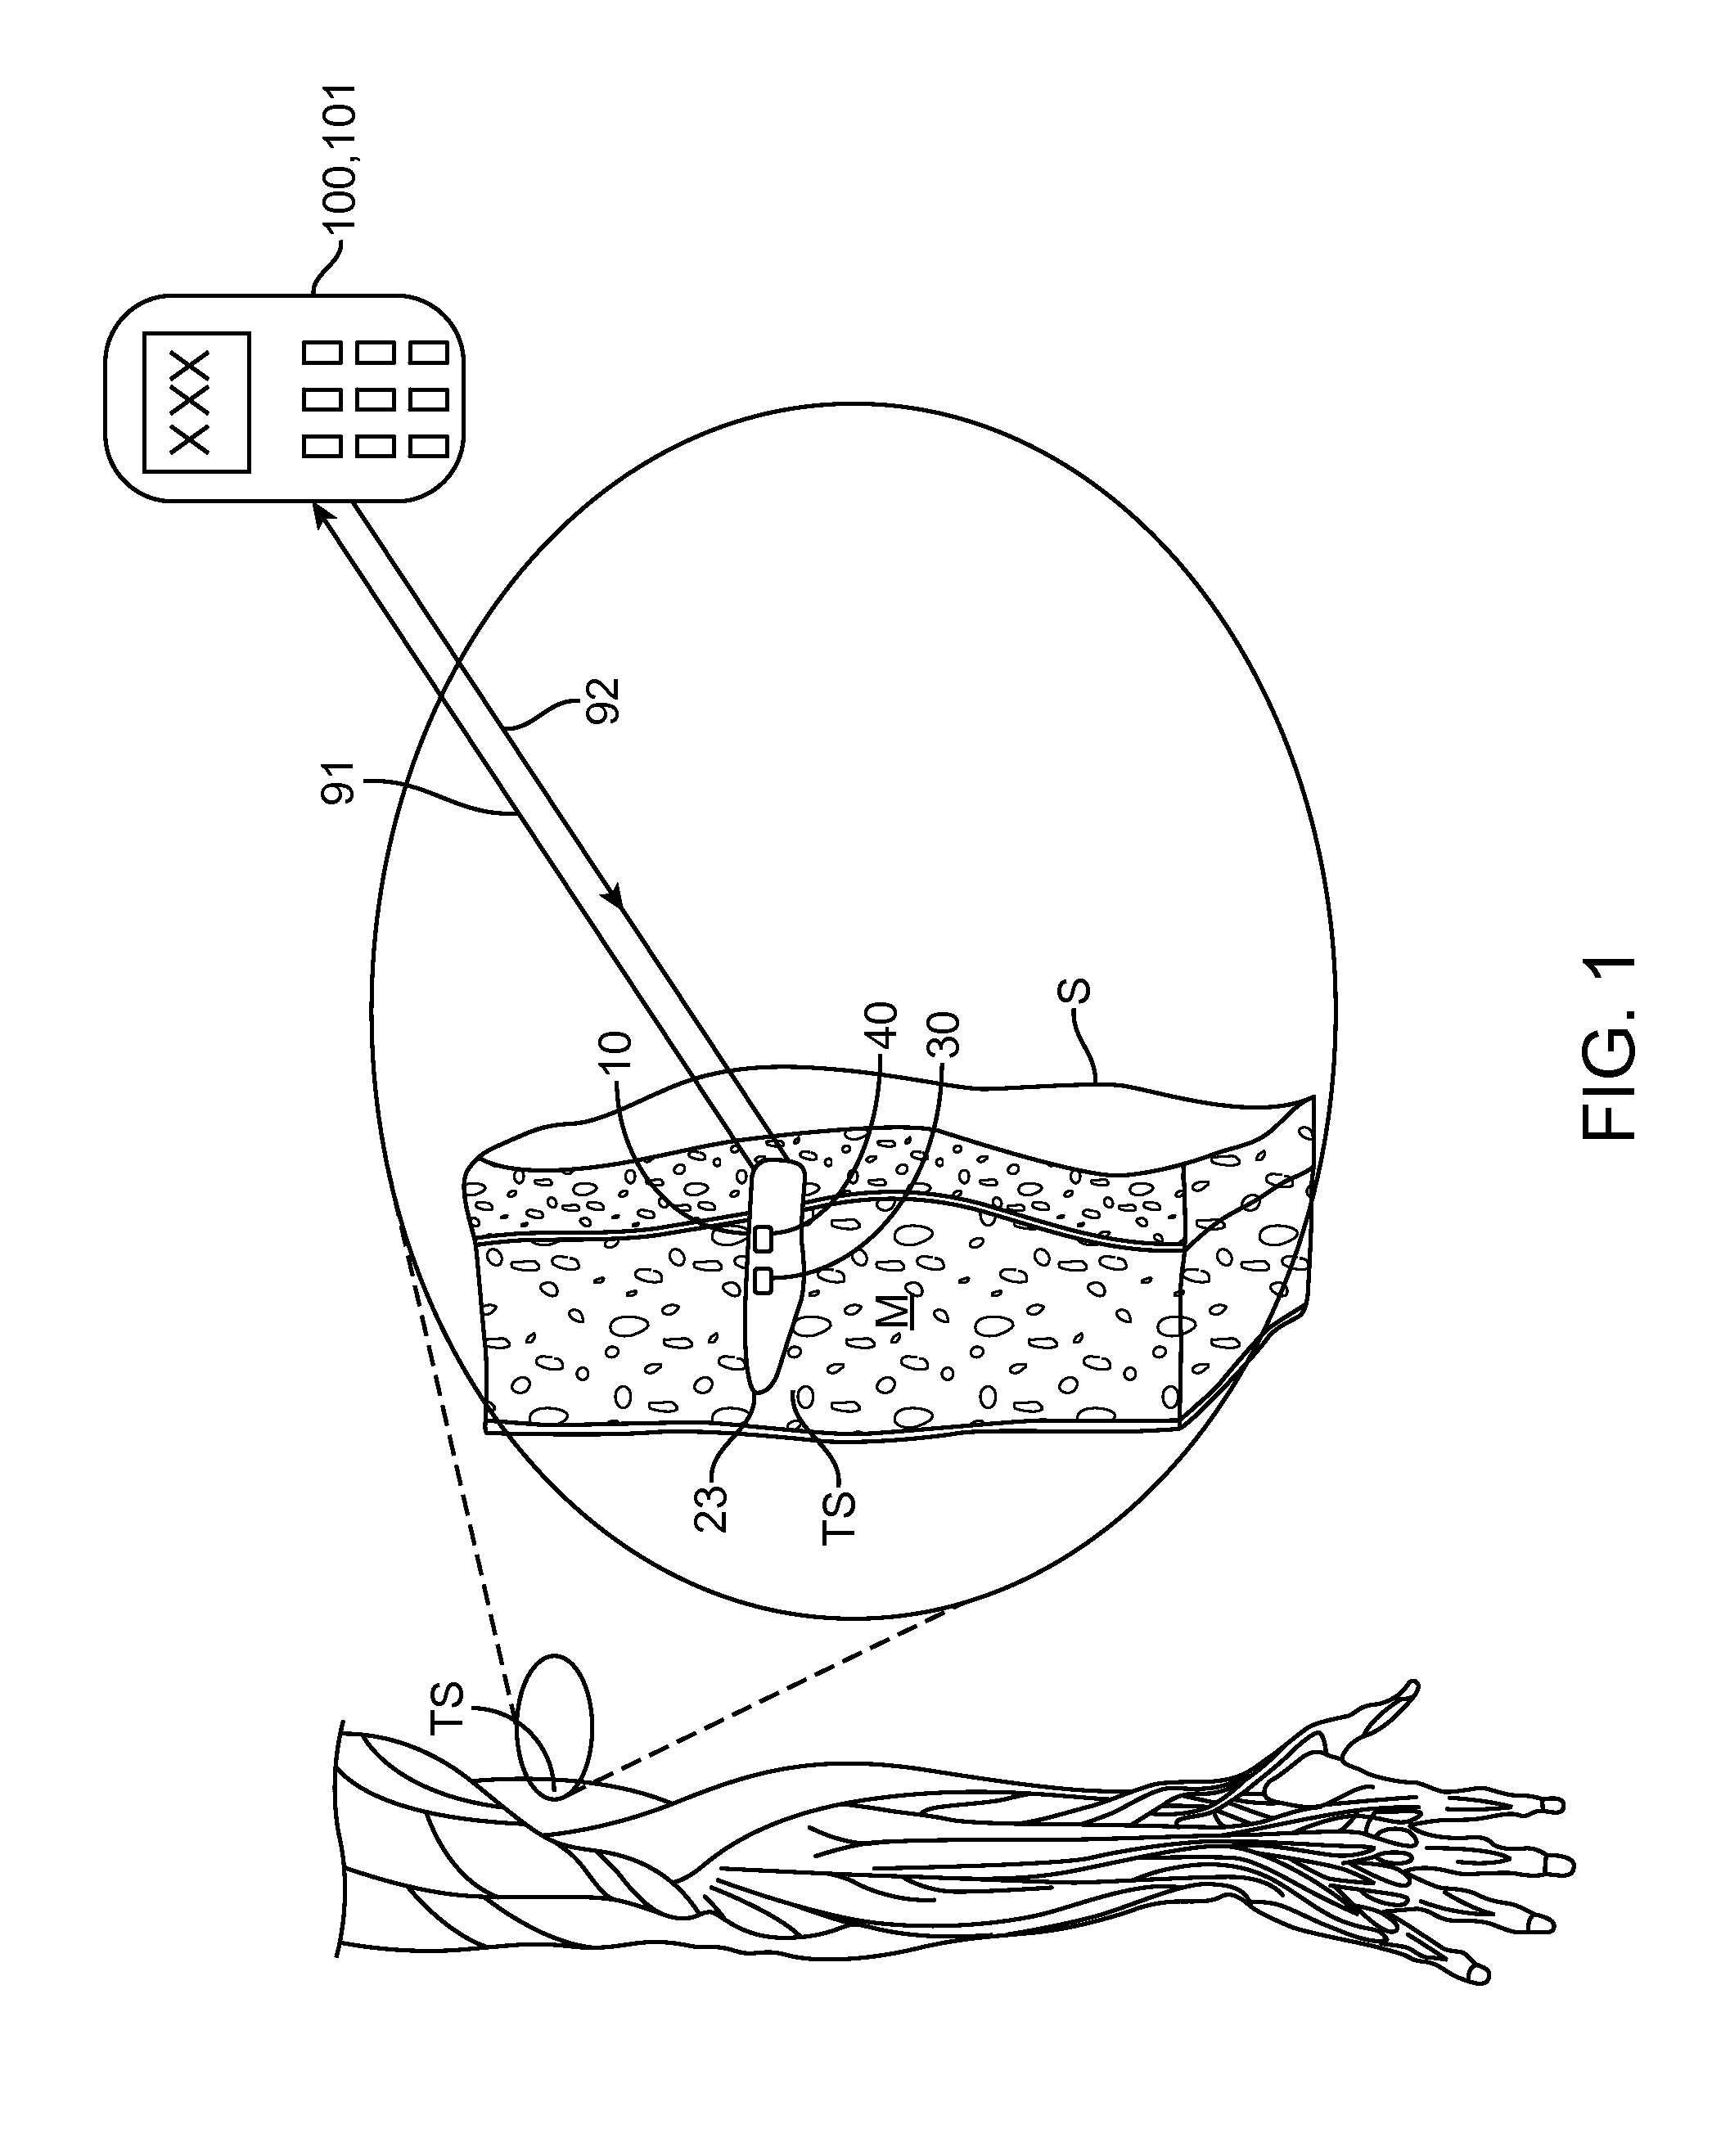 Implantable oximetric measurement apparatus and method of use